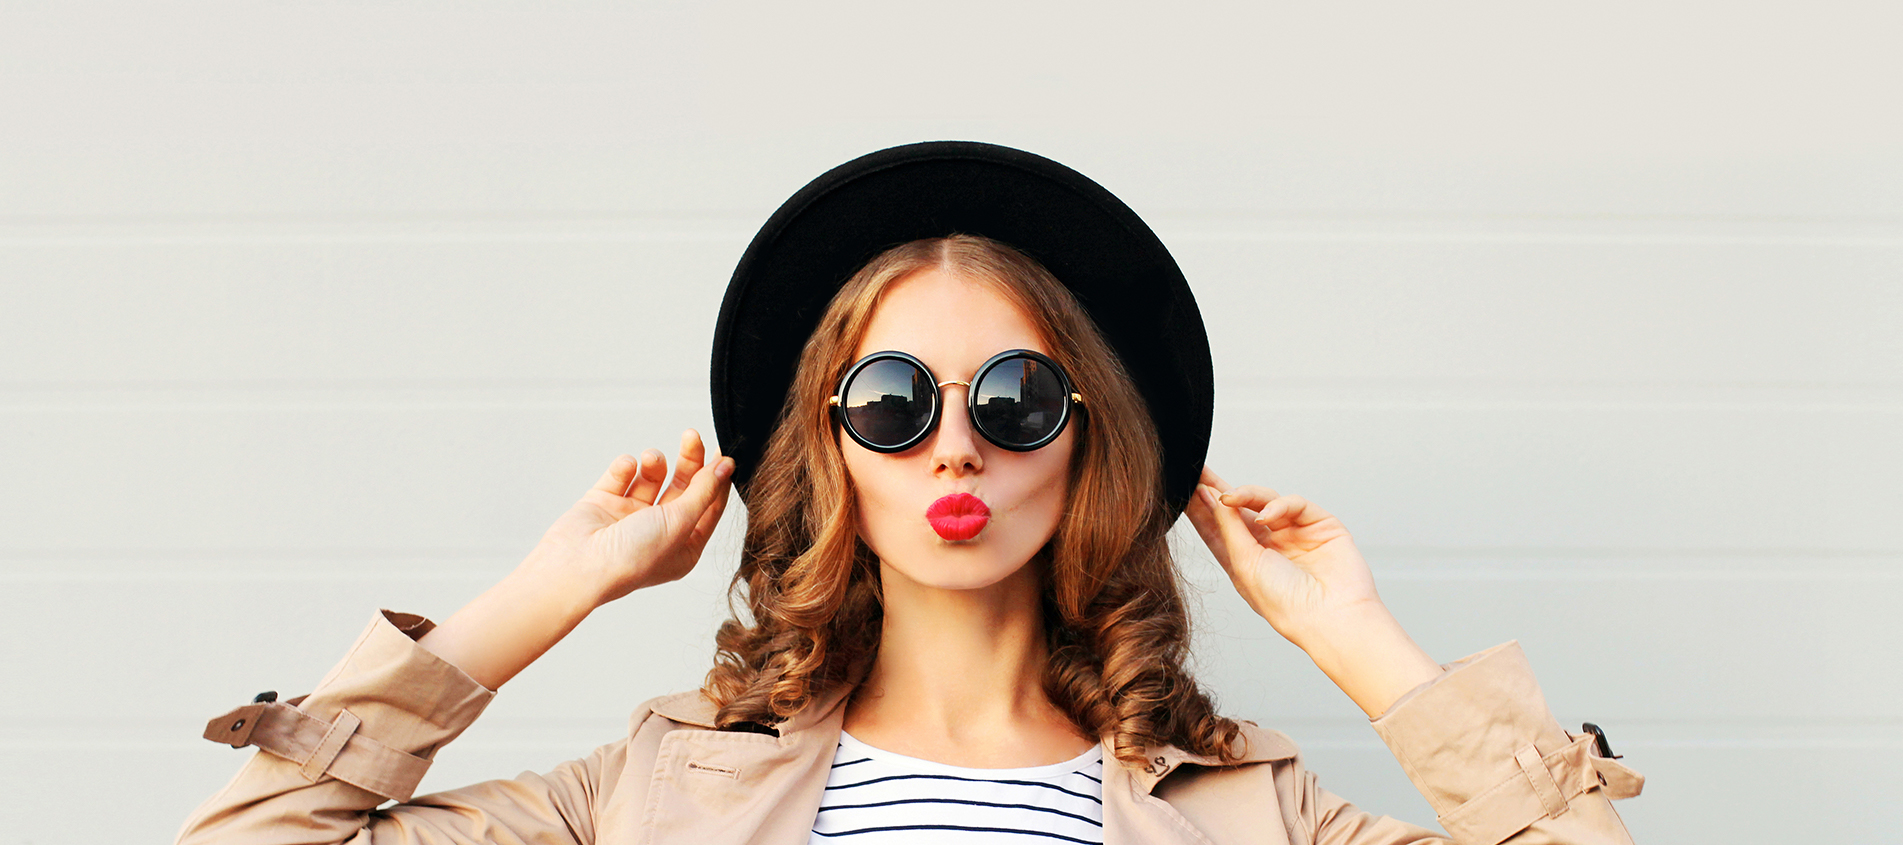 Woman With Round Sunglasses Hat And Red Lipstick